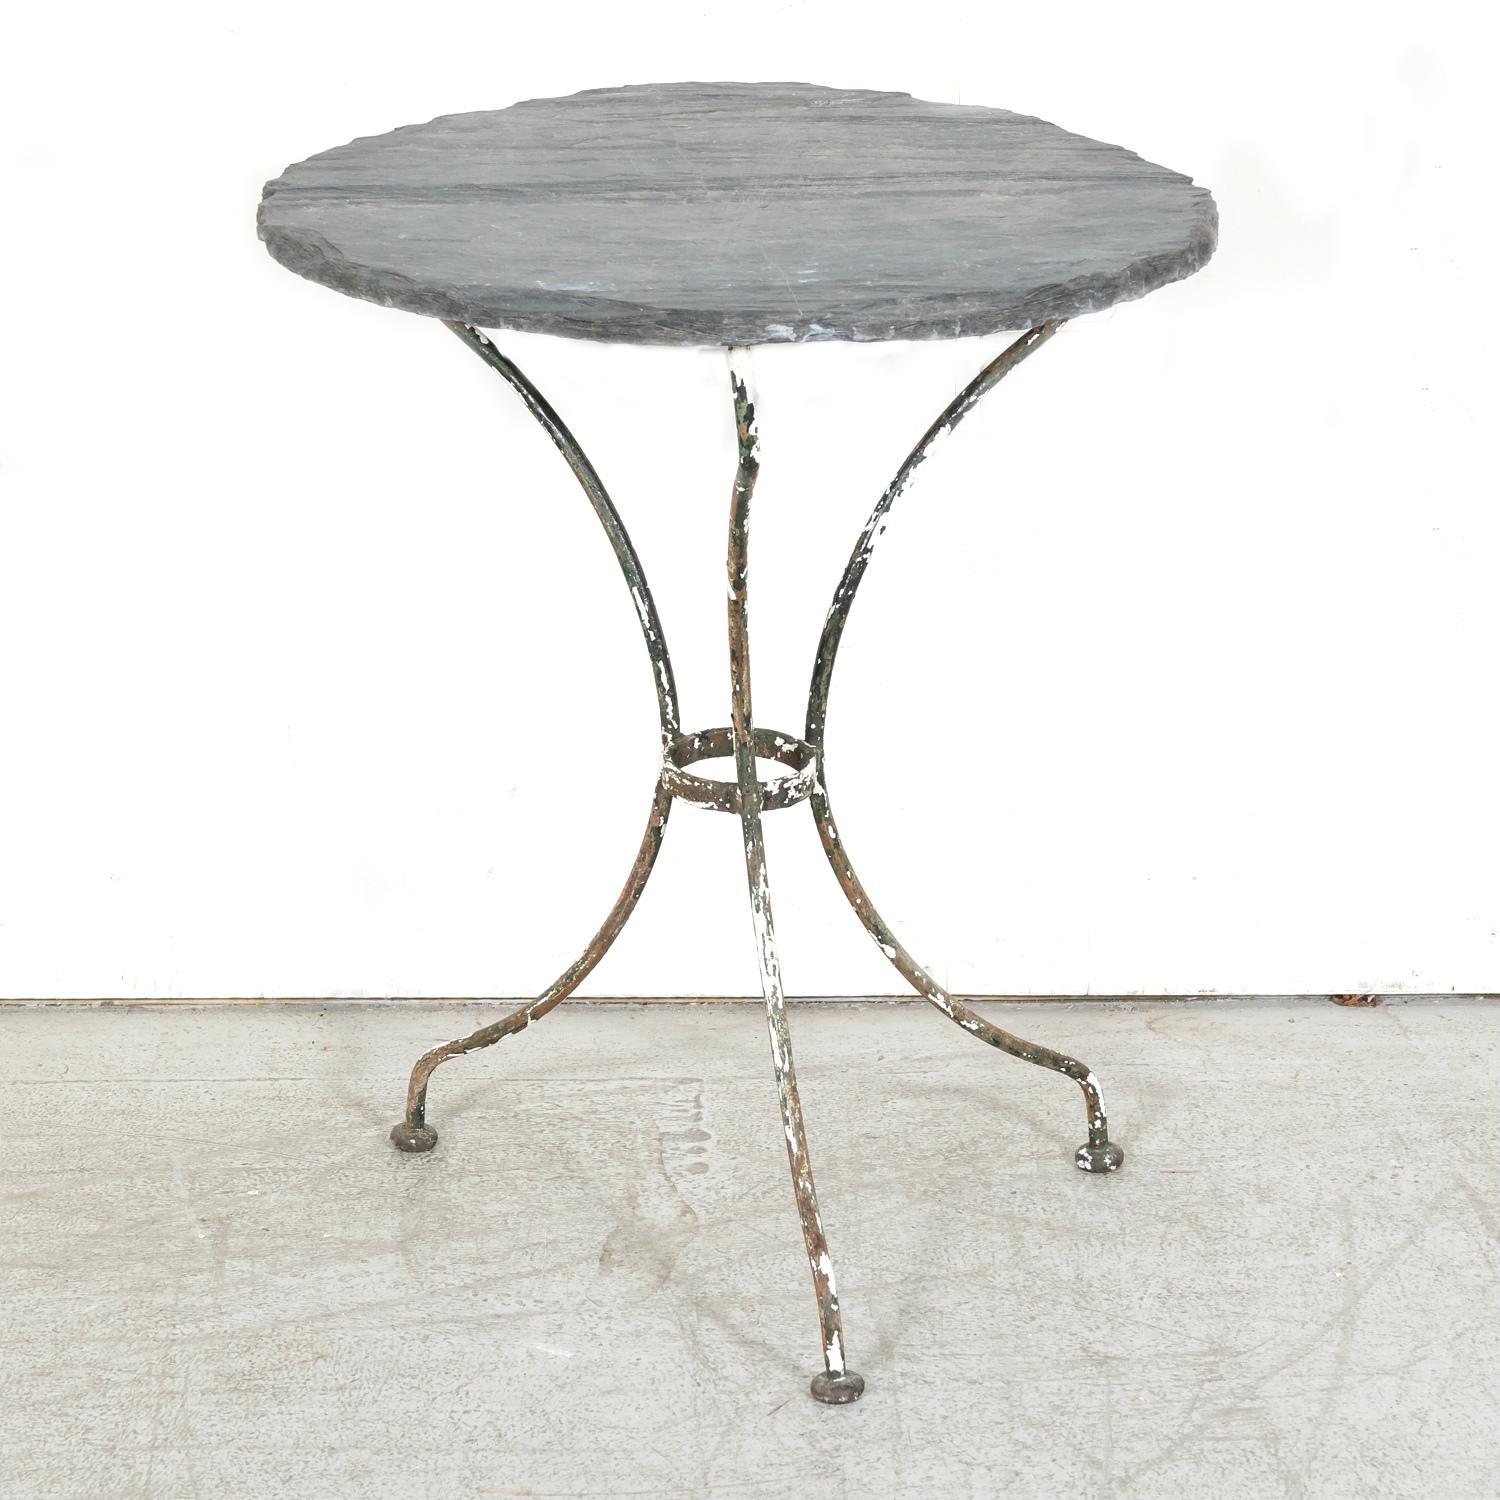 19th Century French Bistro or Garden Table with Round Slate Top and Iron Base In Good Condition For Sale In Birmingham, AL